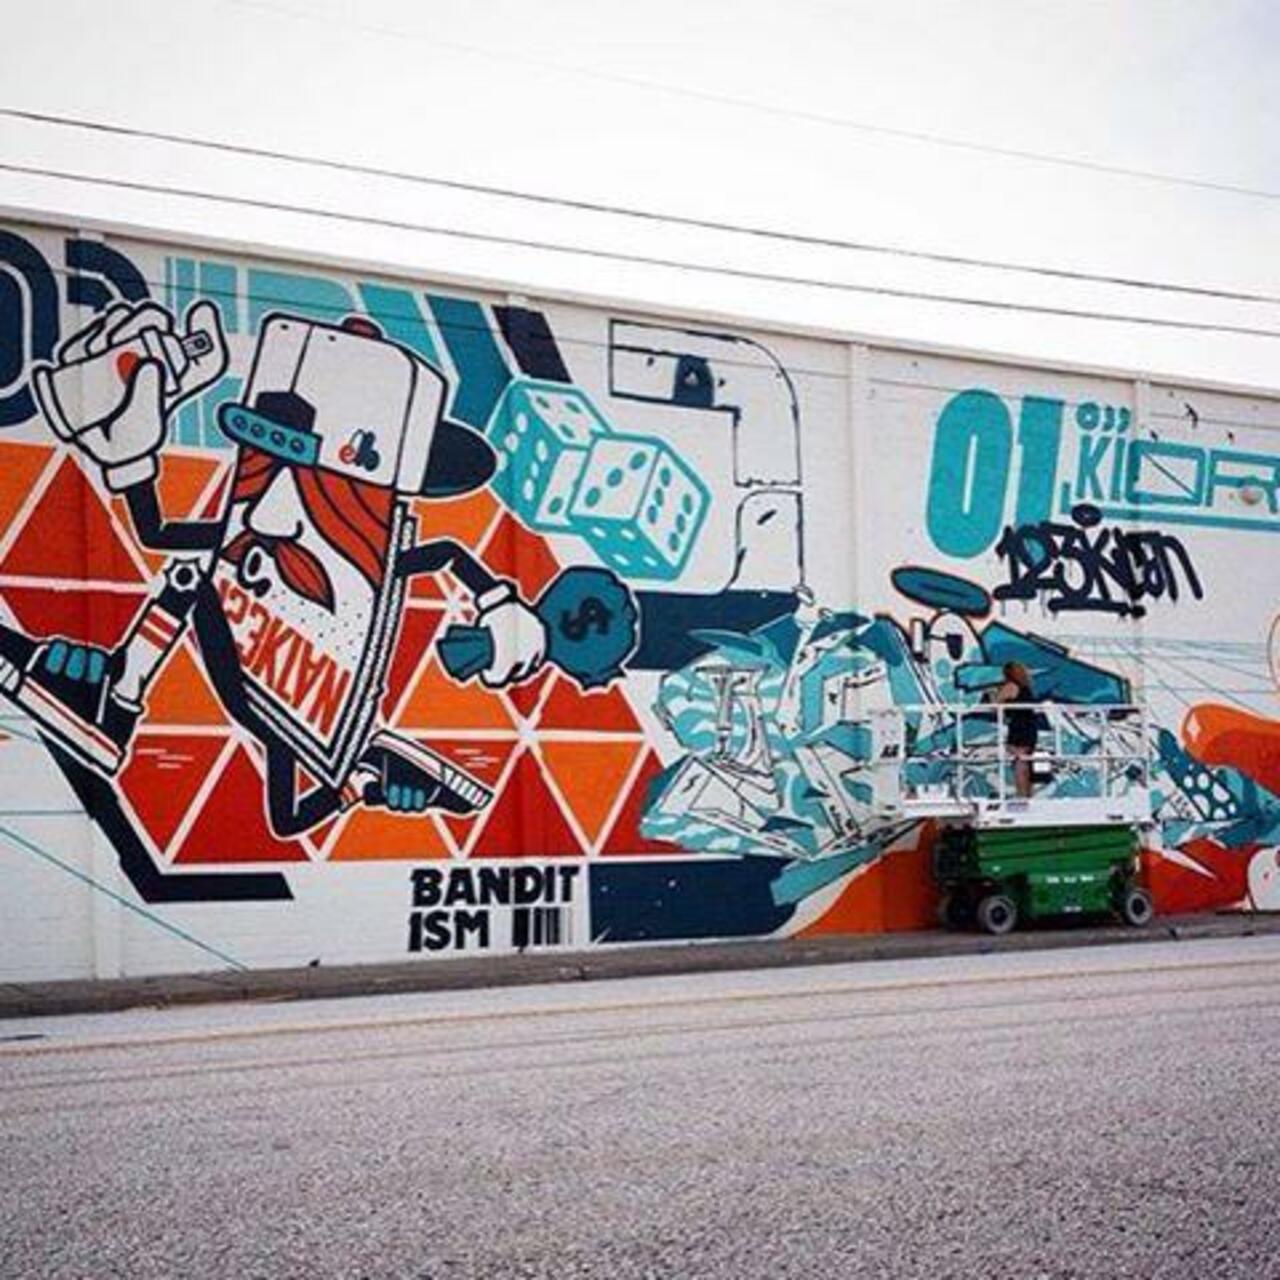 Awesome work as usual from @bandit1sm you guys made my day  #awesome #graffiti #mural #… http://ift.tt/1F0CtGW http://t.co/2Oo5LrxklN